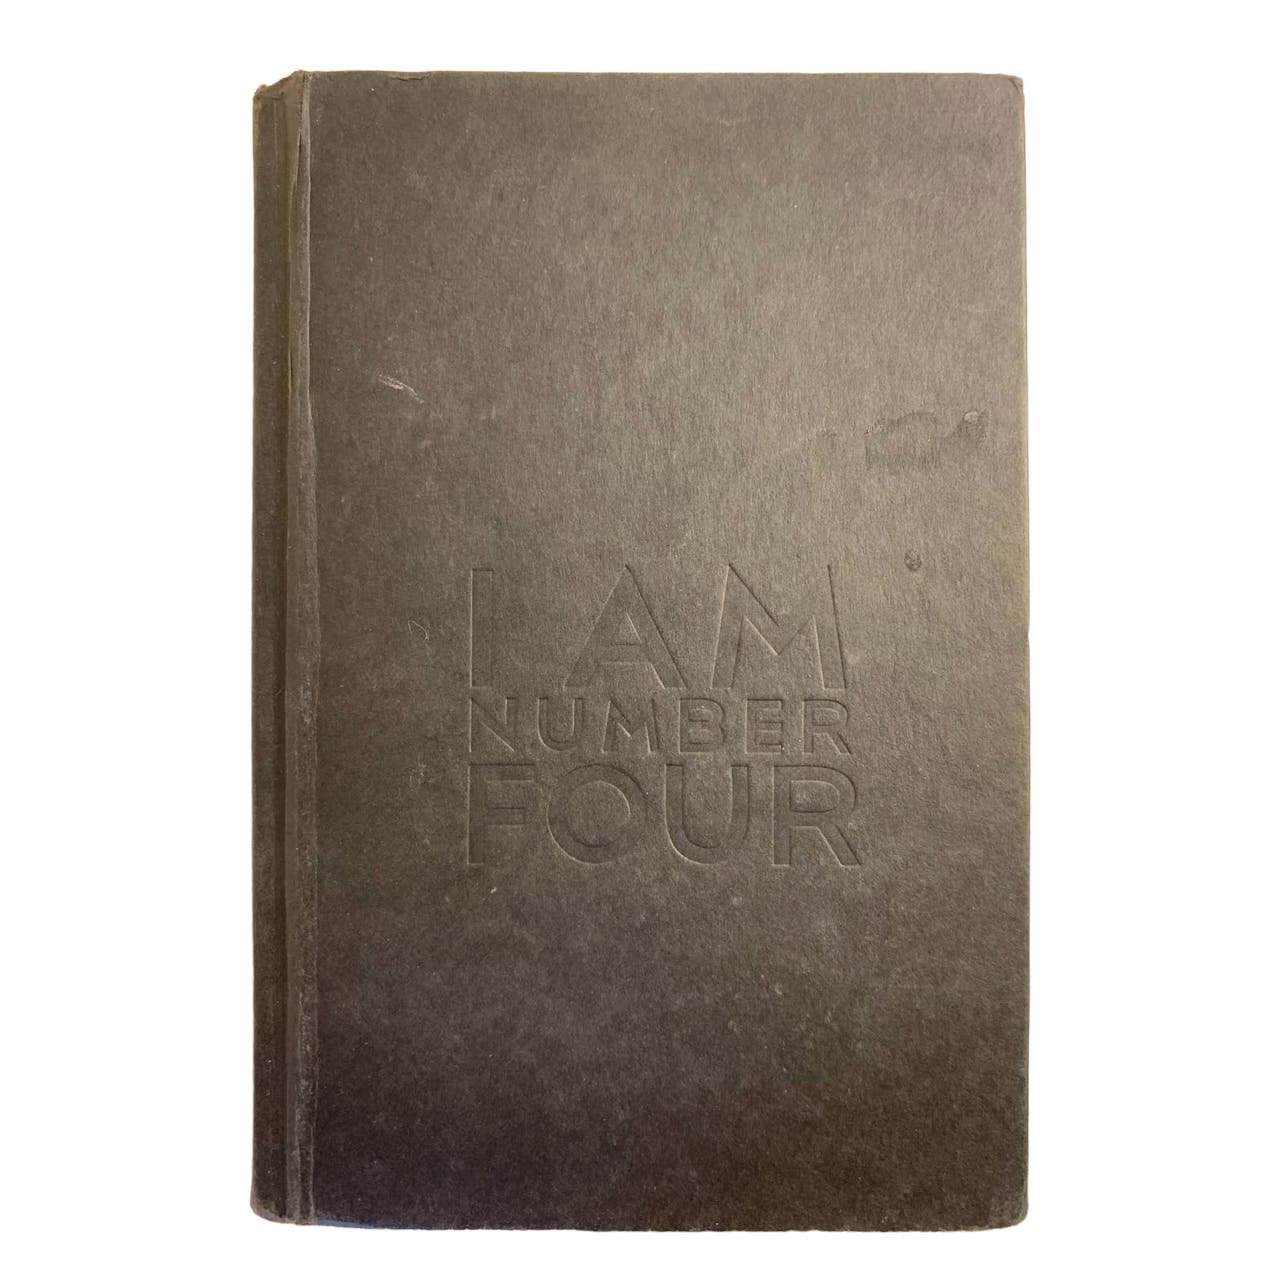 I Am Number Four (Lorien Legacies, Book 1) Hardcover by Pittacus Lore 4CKDRRSLI